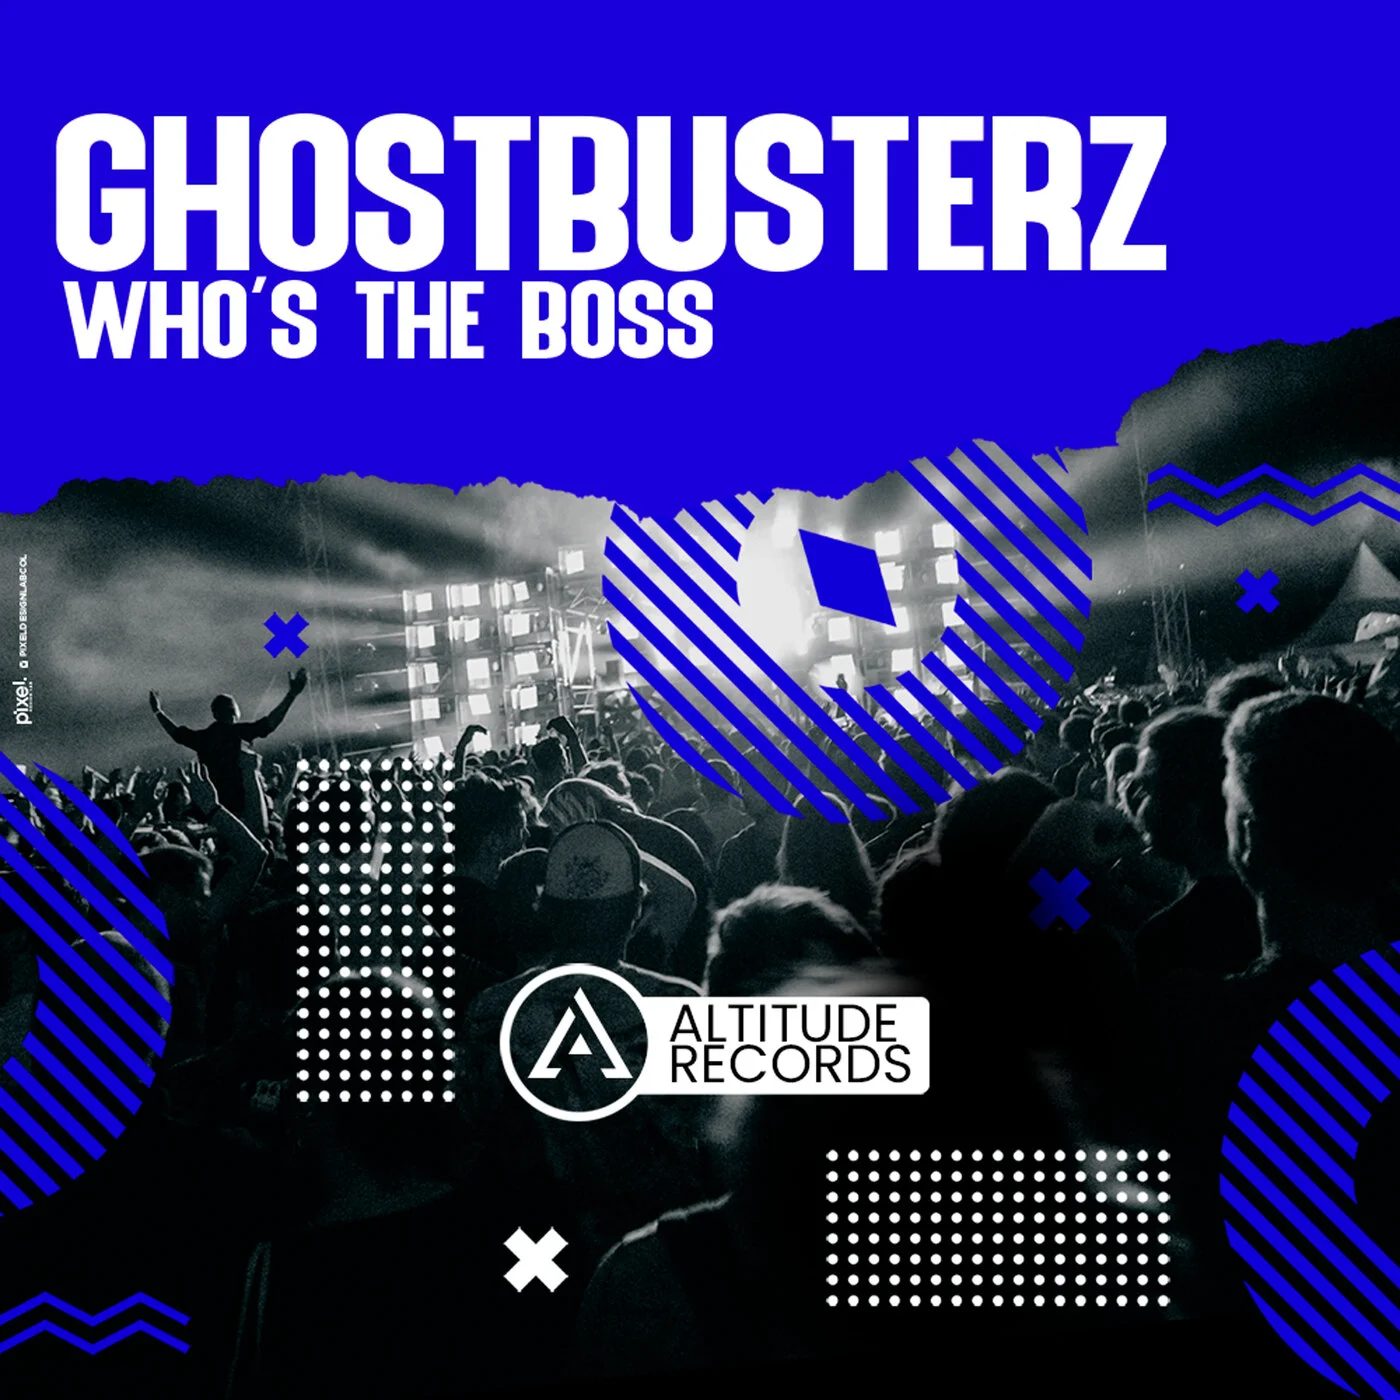 Ghostbusterz - Who's the Boss (Original Mix)